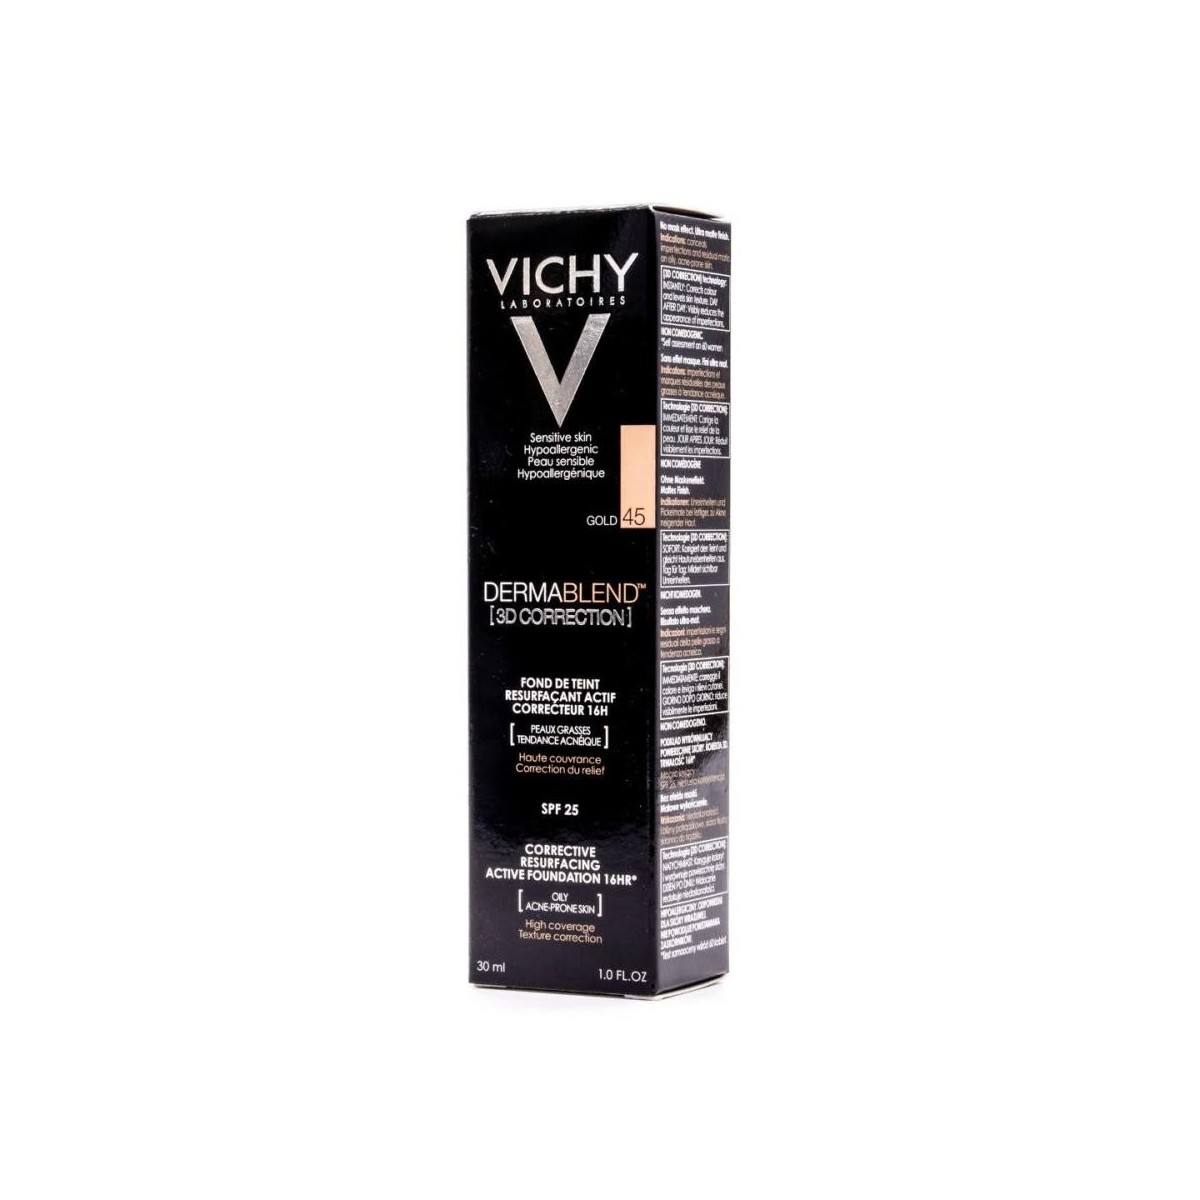 Vichy Dermablend 3D Correction Gold 45 30 ml